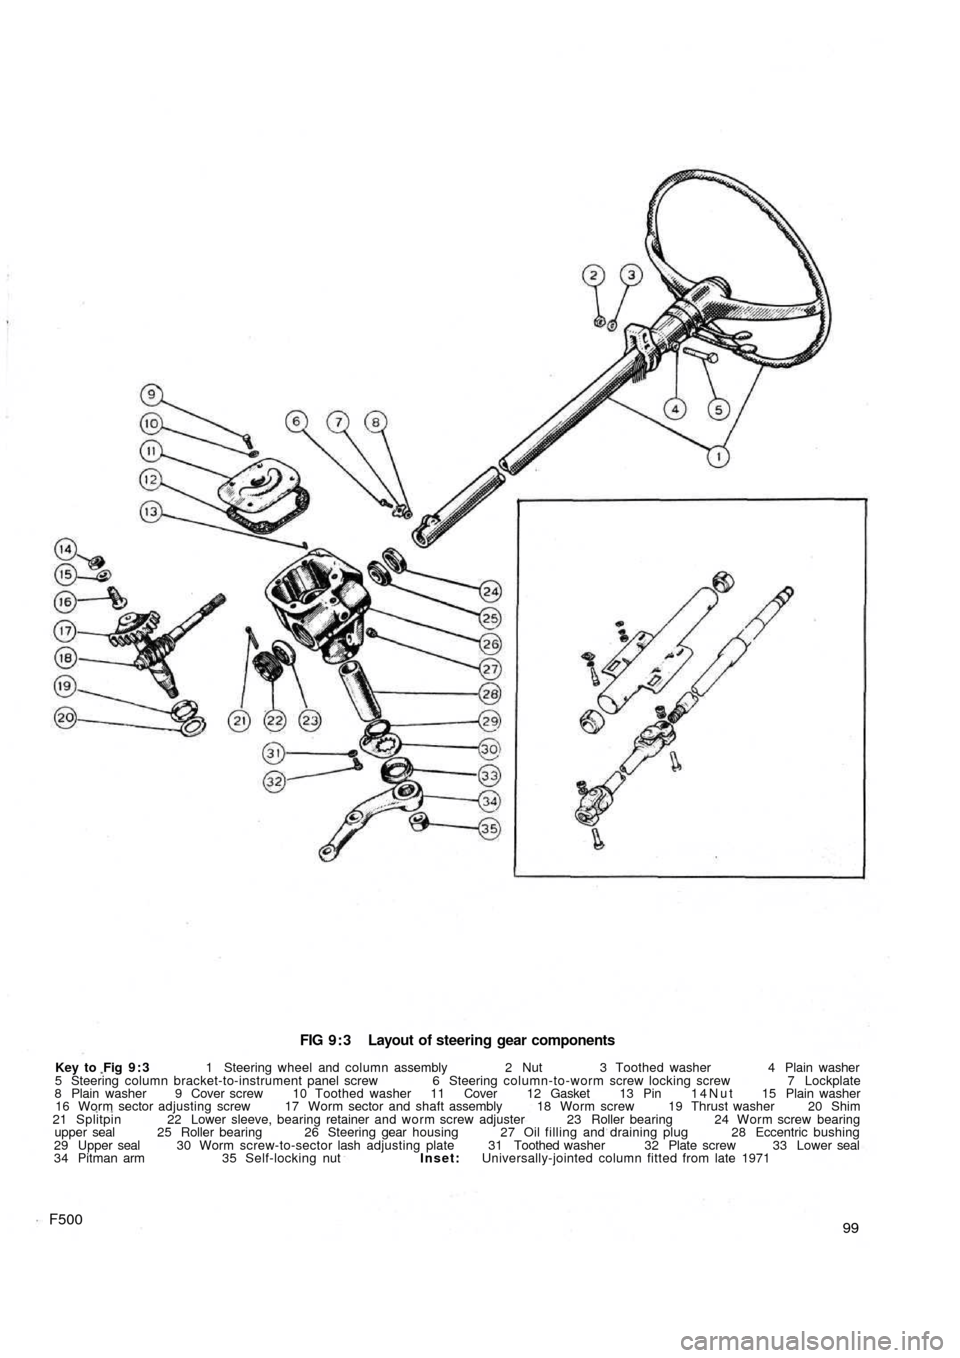 FIAT 500 1960 1.G Workshop Manual FIG 9 : 3  Layout of steering gear components
Key to  Fig 9 : 3 1 Steering wheel and column assembly 2 Nut 3 Toothed washer 4 Plain washer
5 Steering column bracket-to-instrument panel screw 6 Steerin